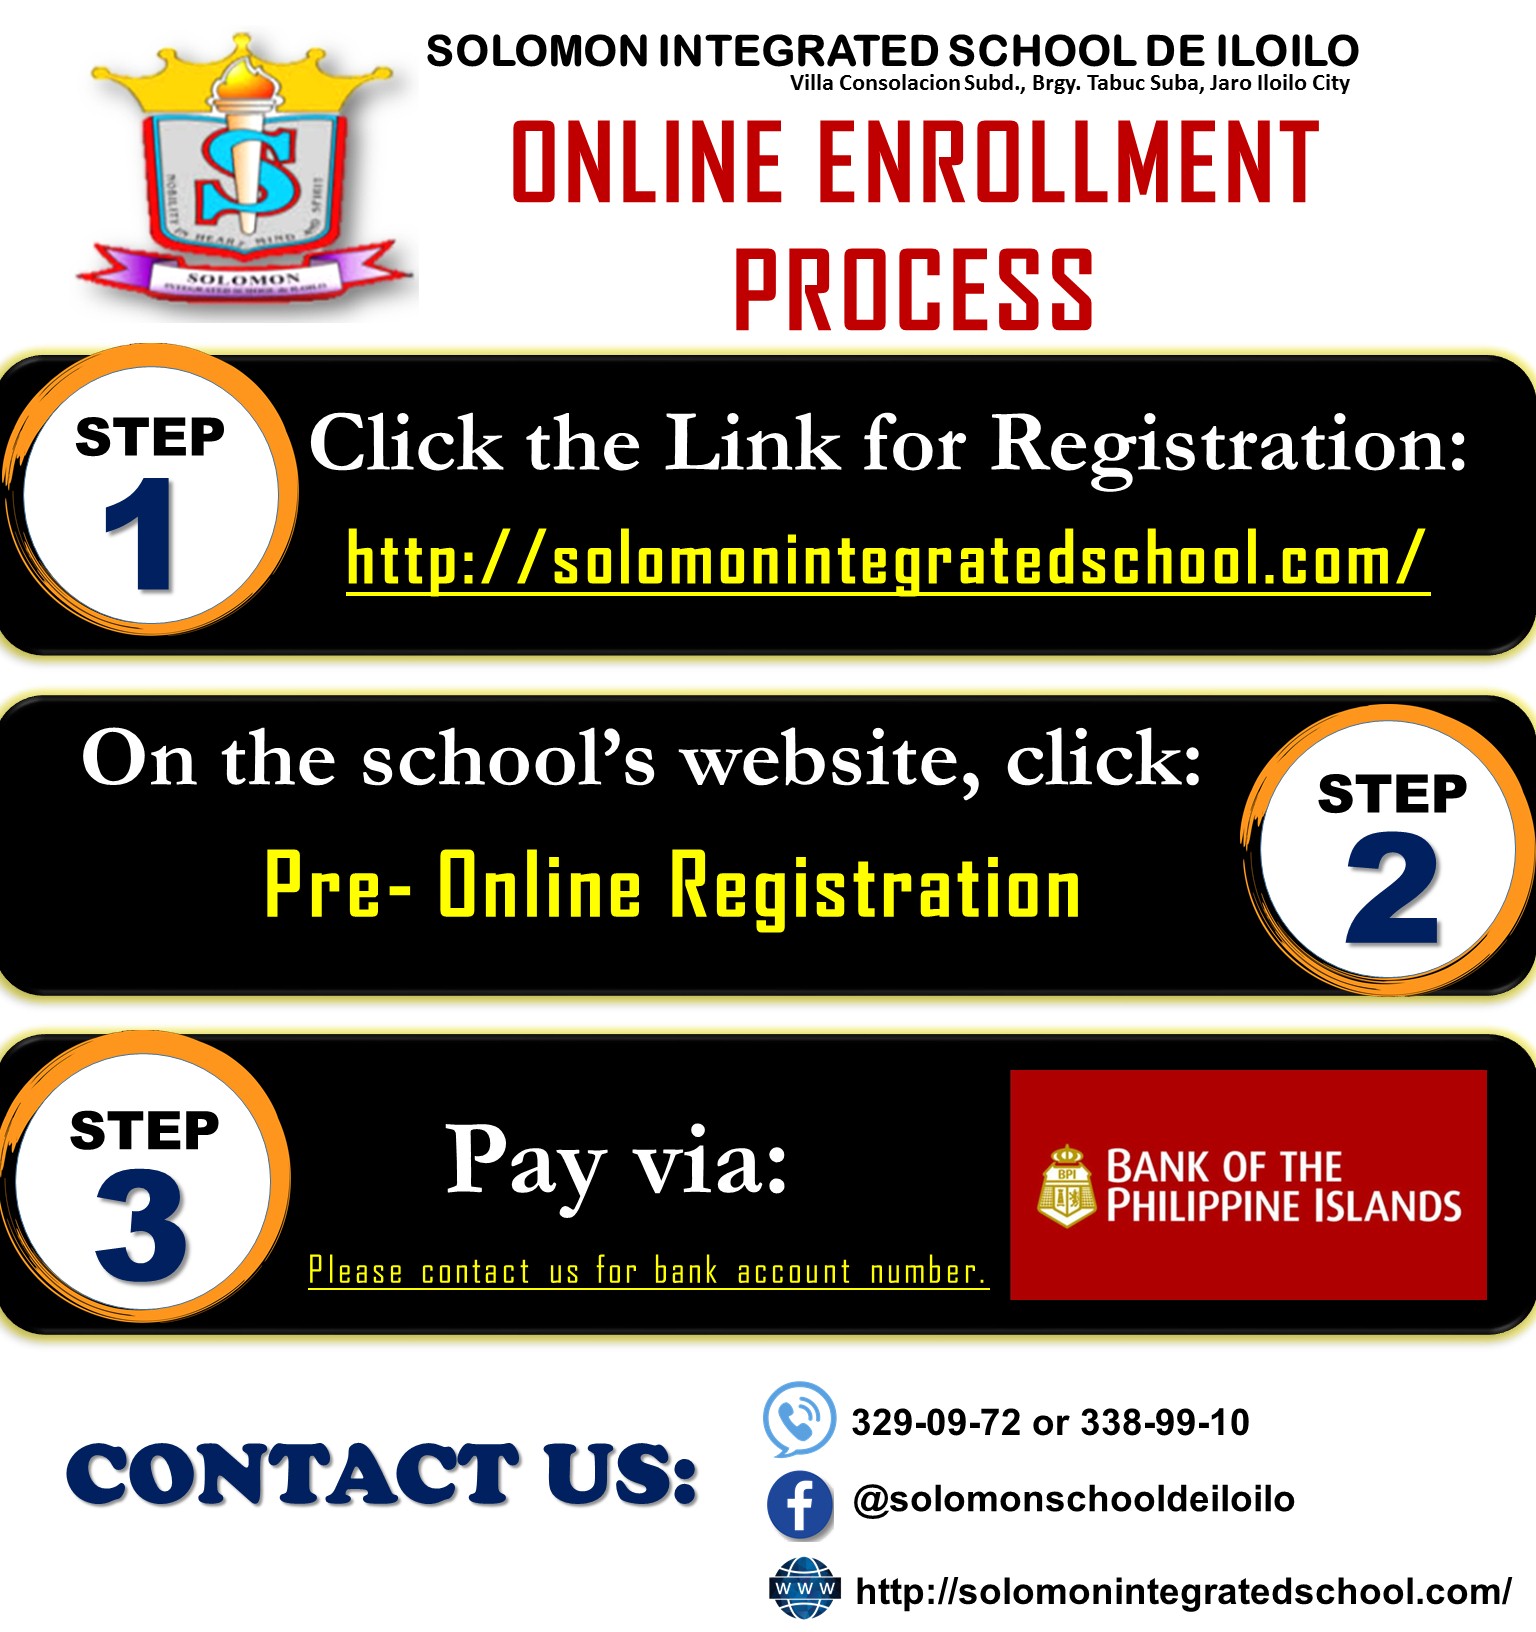 Two ways to choose from. Enroll your child now! 
#sisdei
#wheretruewisdombegins